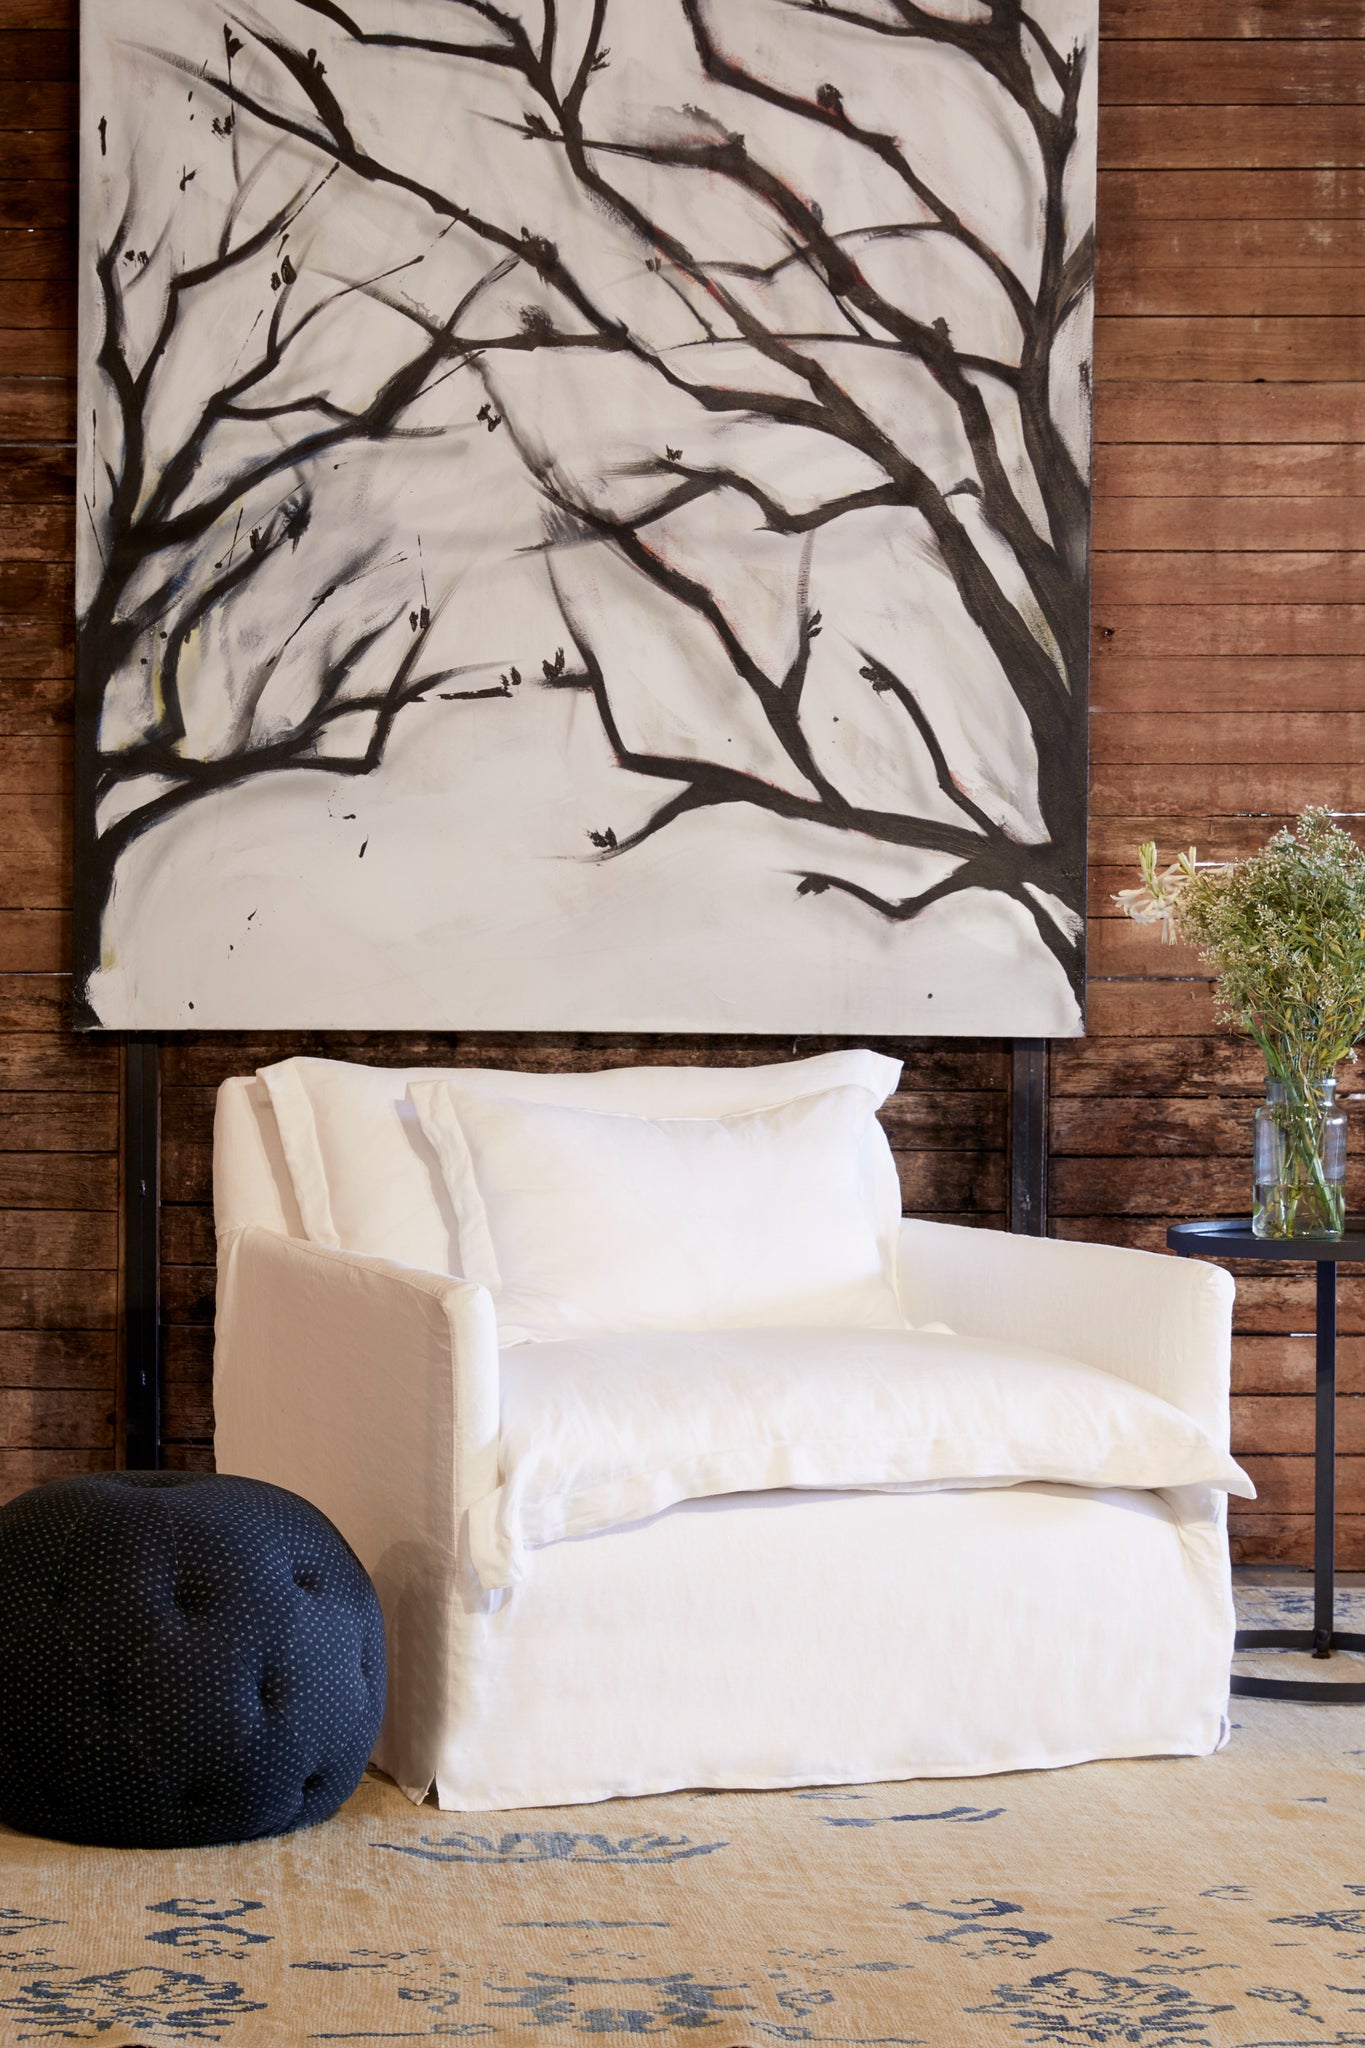  Paloma chair and a half in Otis White next to a dark pouf, and a metal side table. In the background is a wood wall with a large painting of tree branches. Photographed in Otis White. 